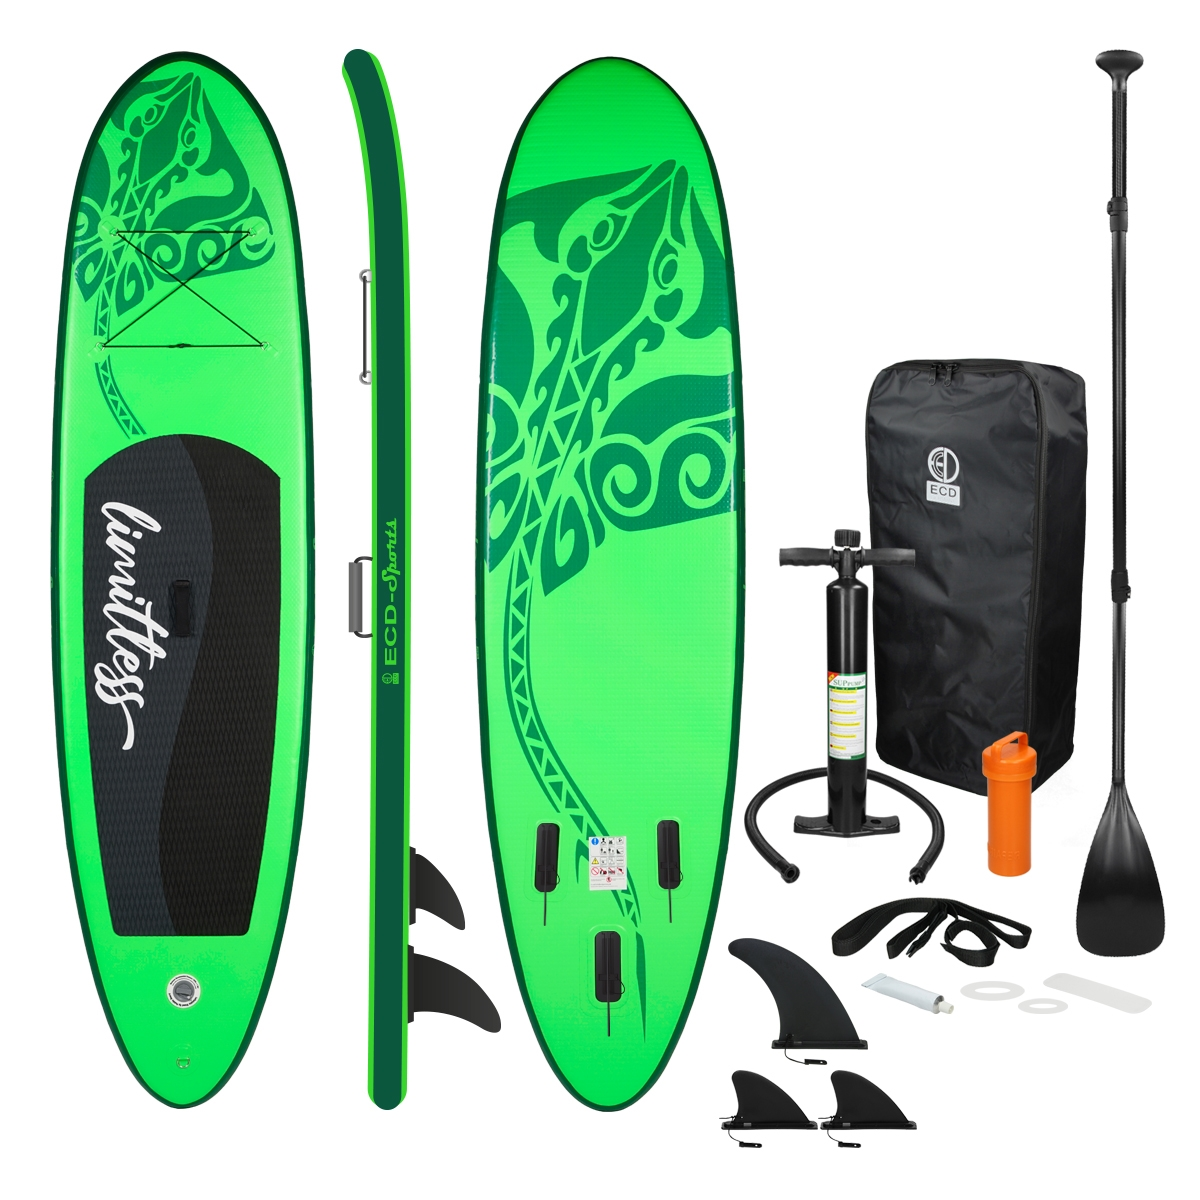 ECD-GERMANY Aufblasbares Stand Up Paddle Paddle, Green Up Board Stand